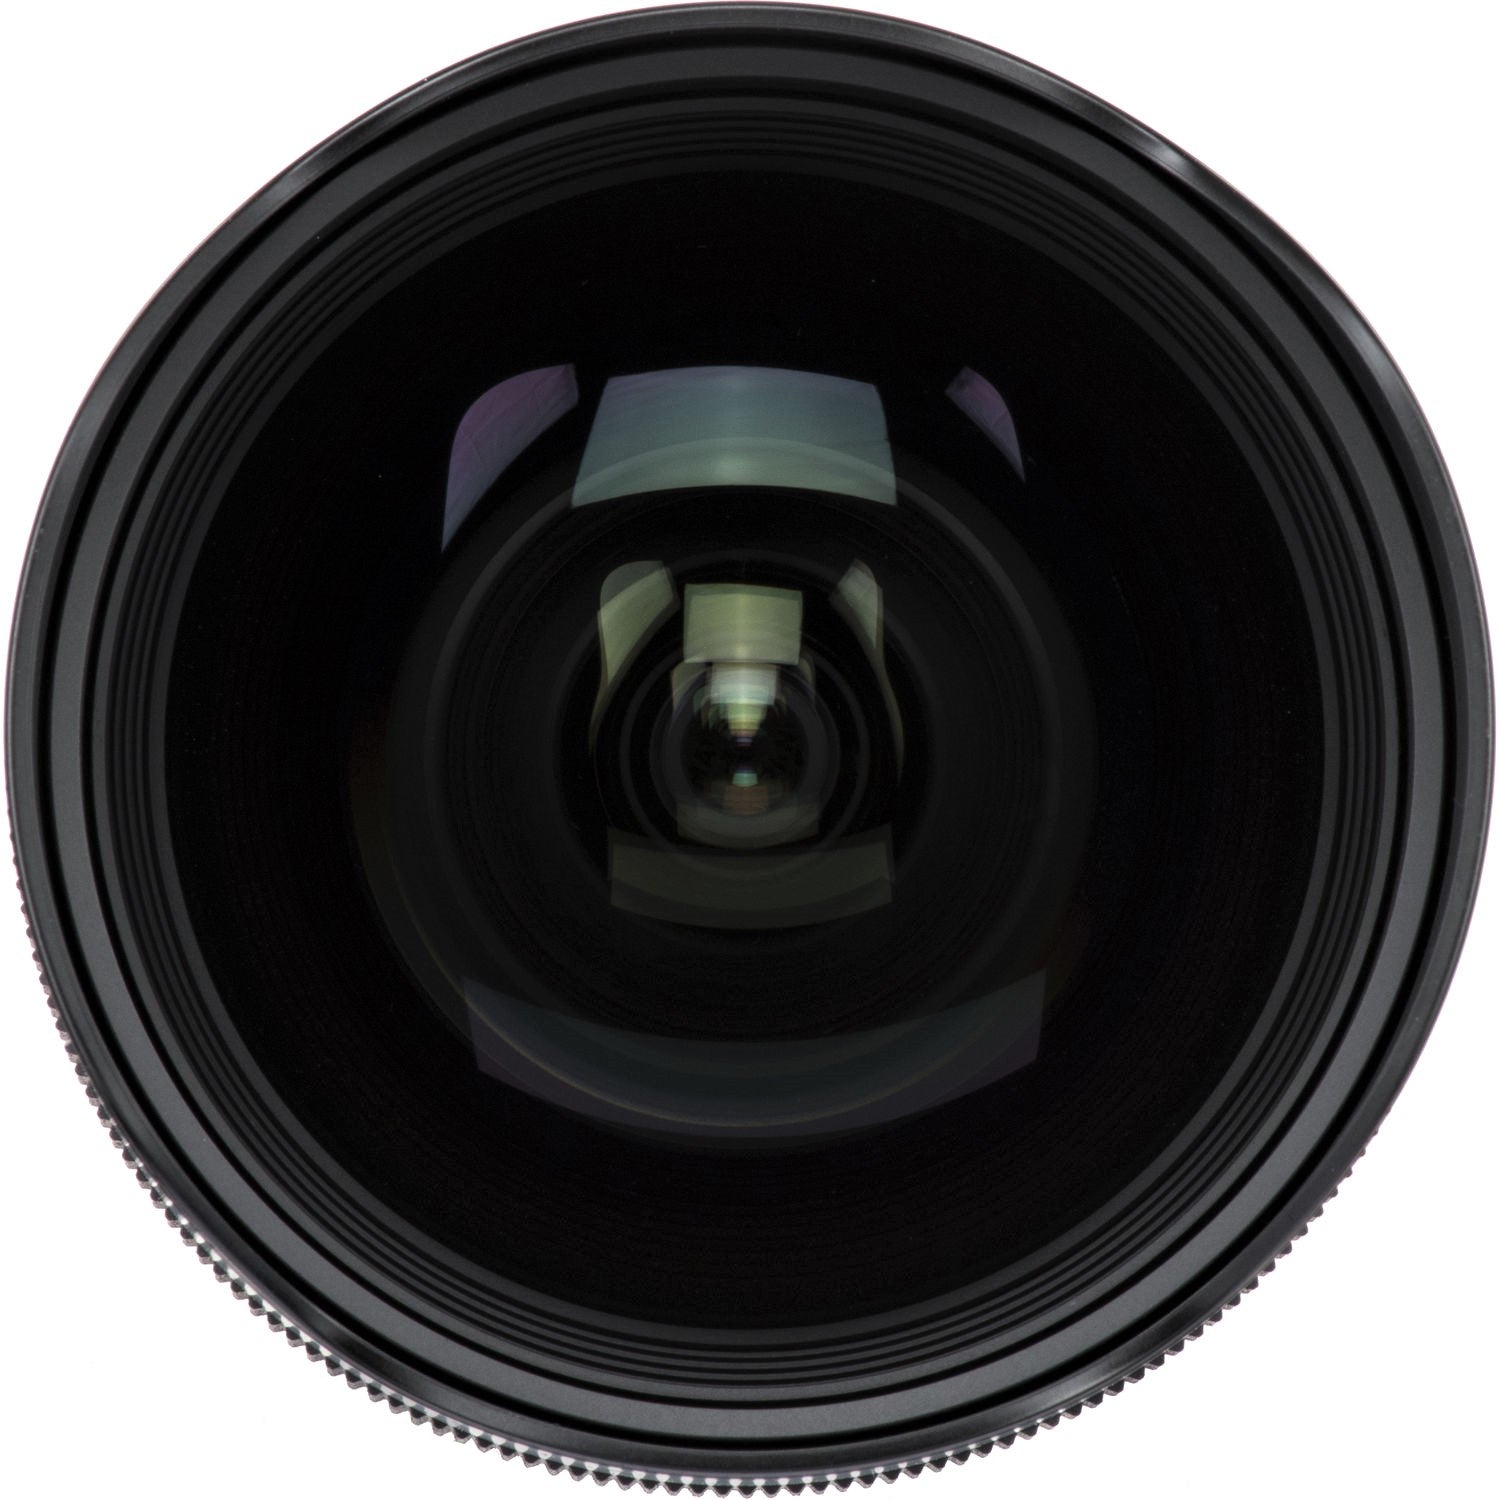 Sigma 14-24mm F2.8 DG HSM Art Lens for Canon EF in a Front Close-Up View